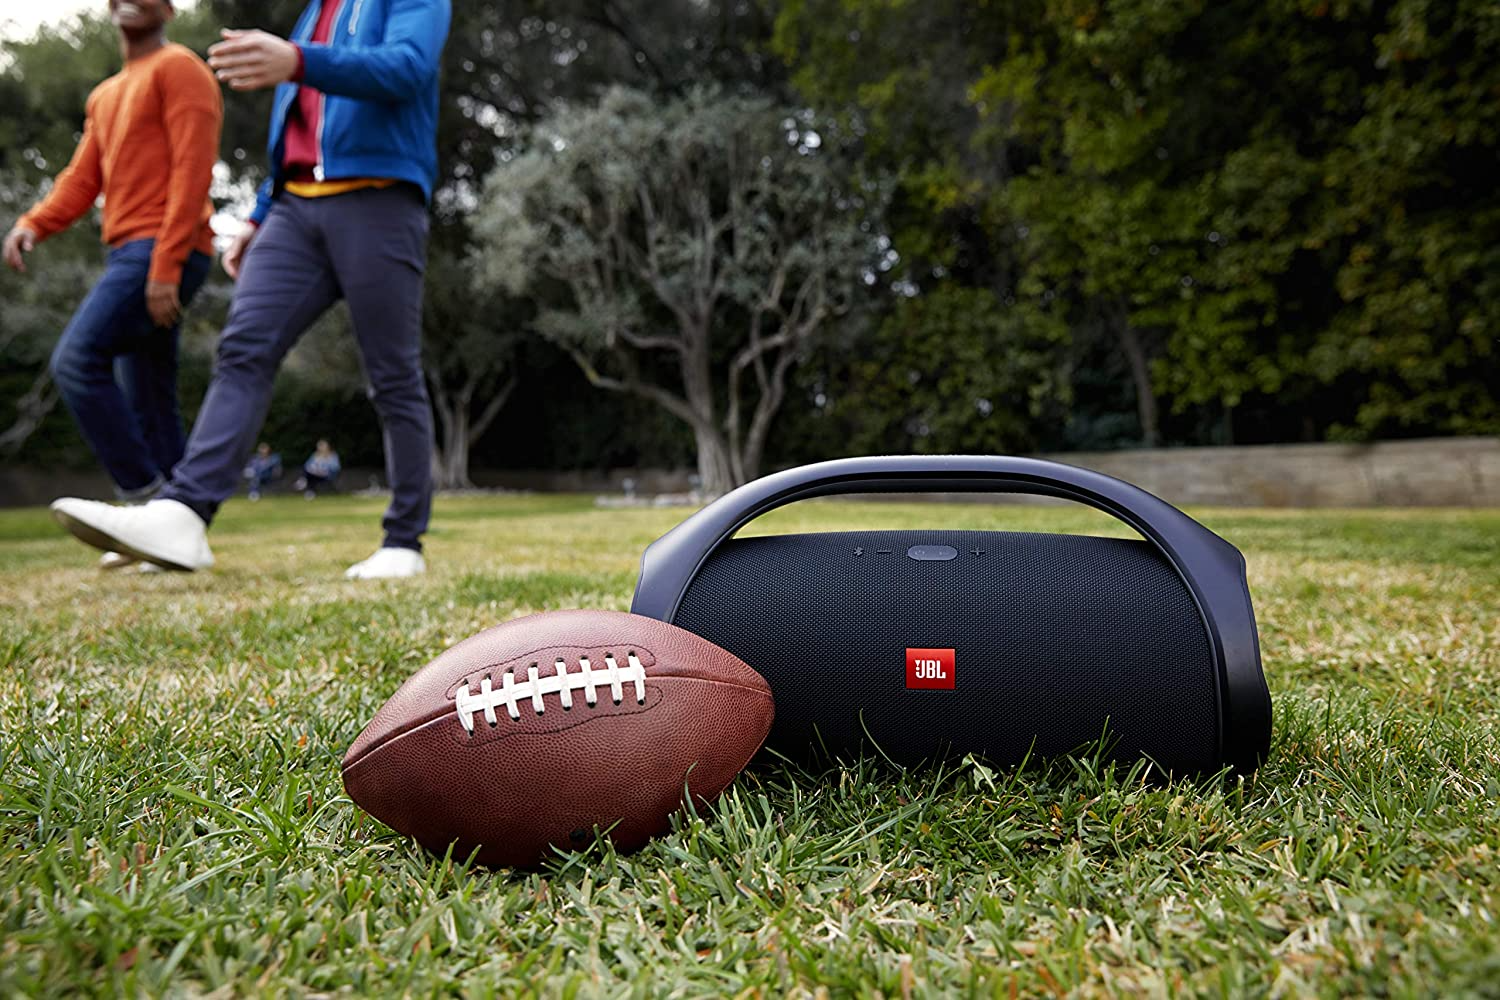 A JBL Boombox 2 in the grass with a football in front of it and people walking in the distance behind it.